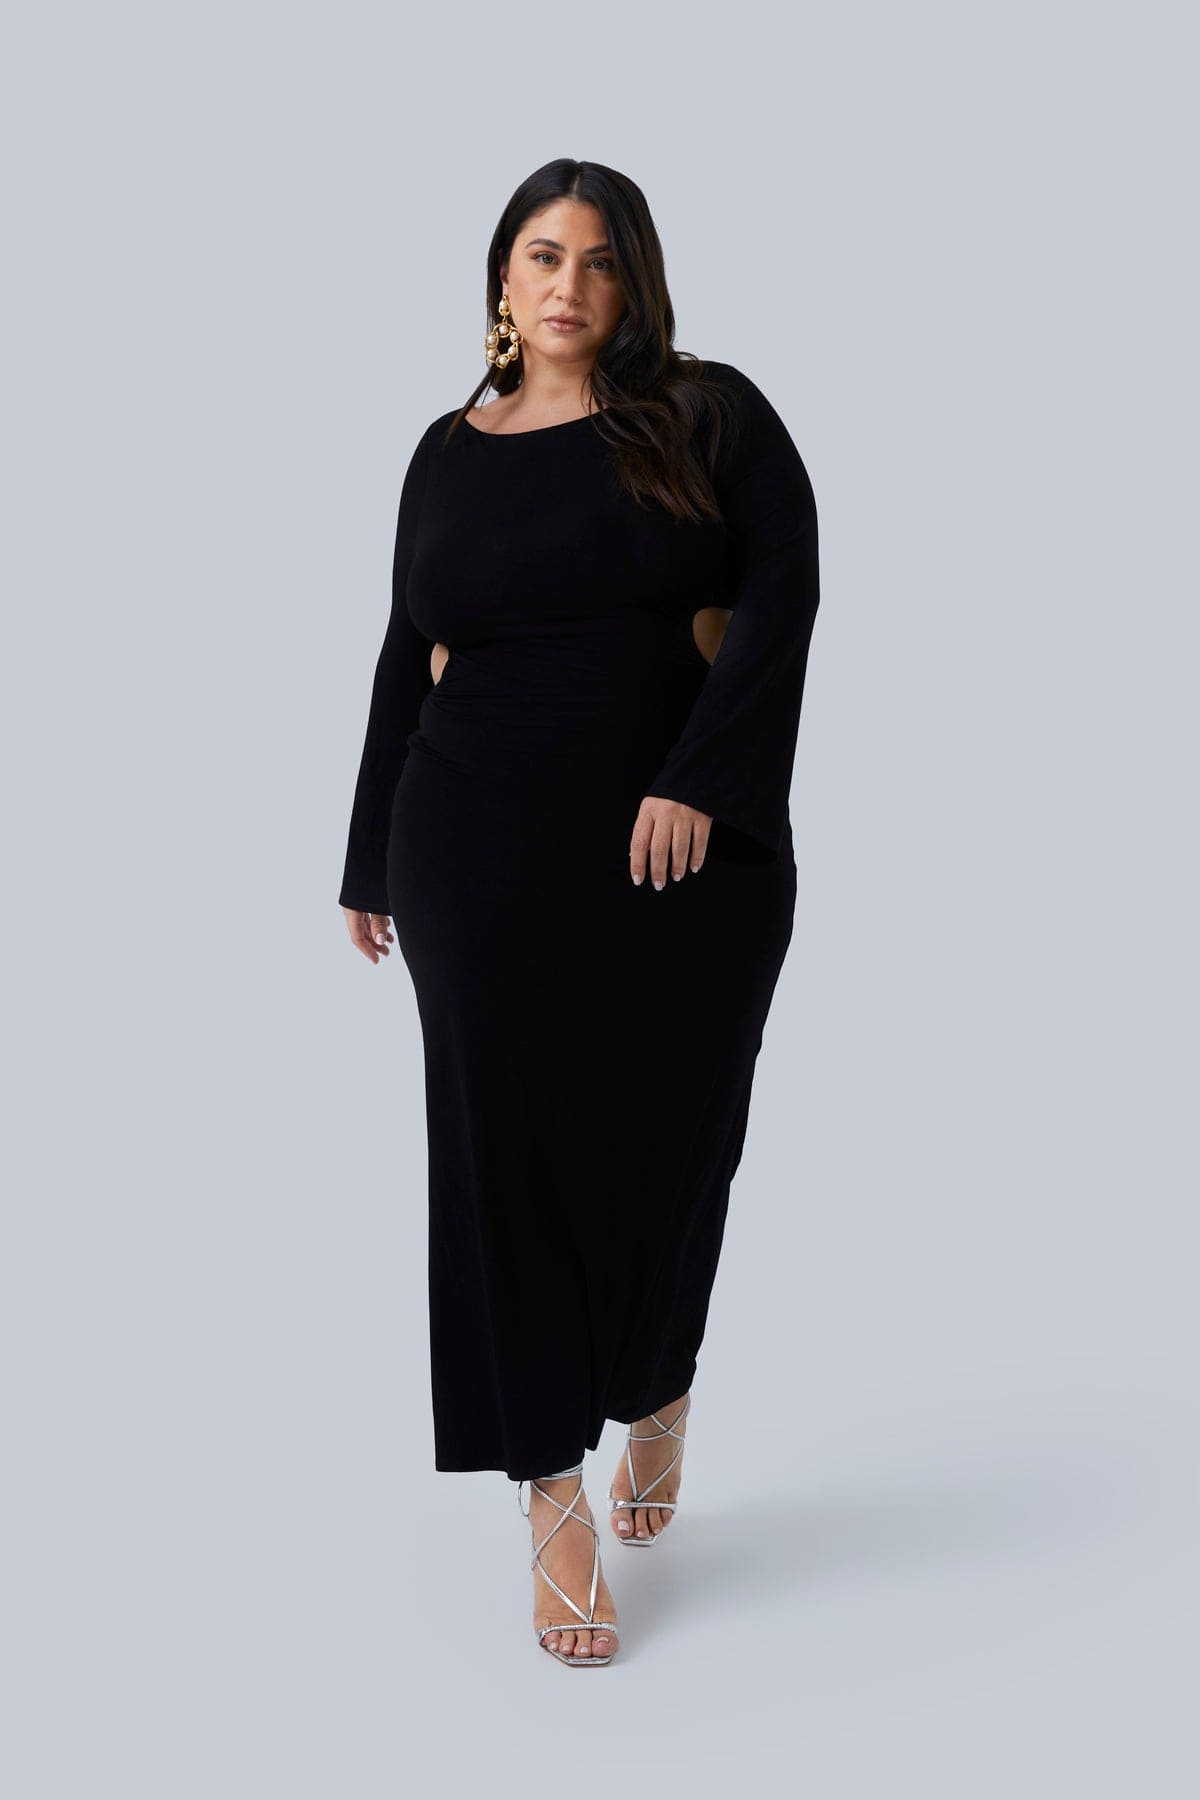 Full look of the Gabrielle Maxi plus size dress by Gia IRL. This dress has 2 layers of buttery fabric the hug your curves. Model is taking a step forward and her shoes are visible. Dress goes to ankles.